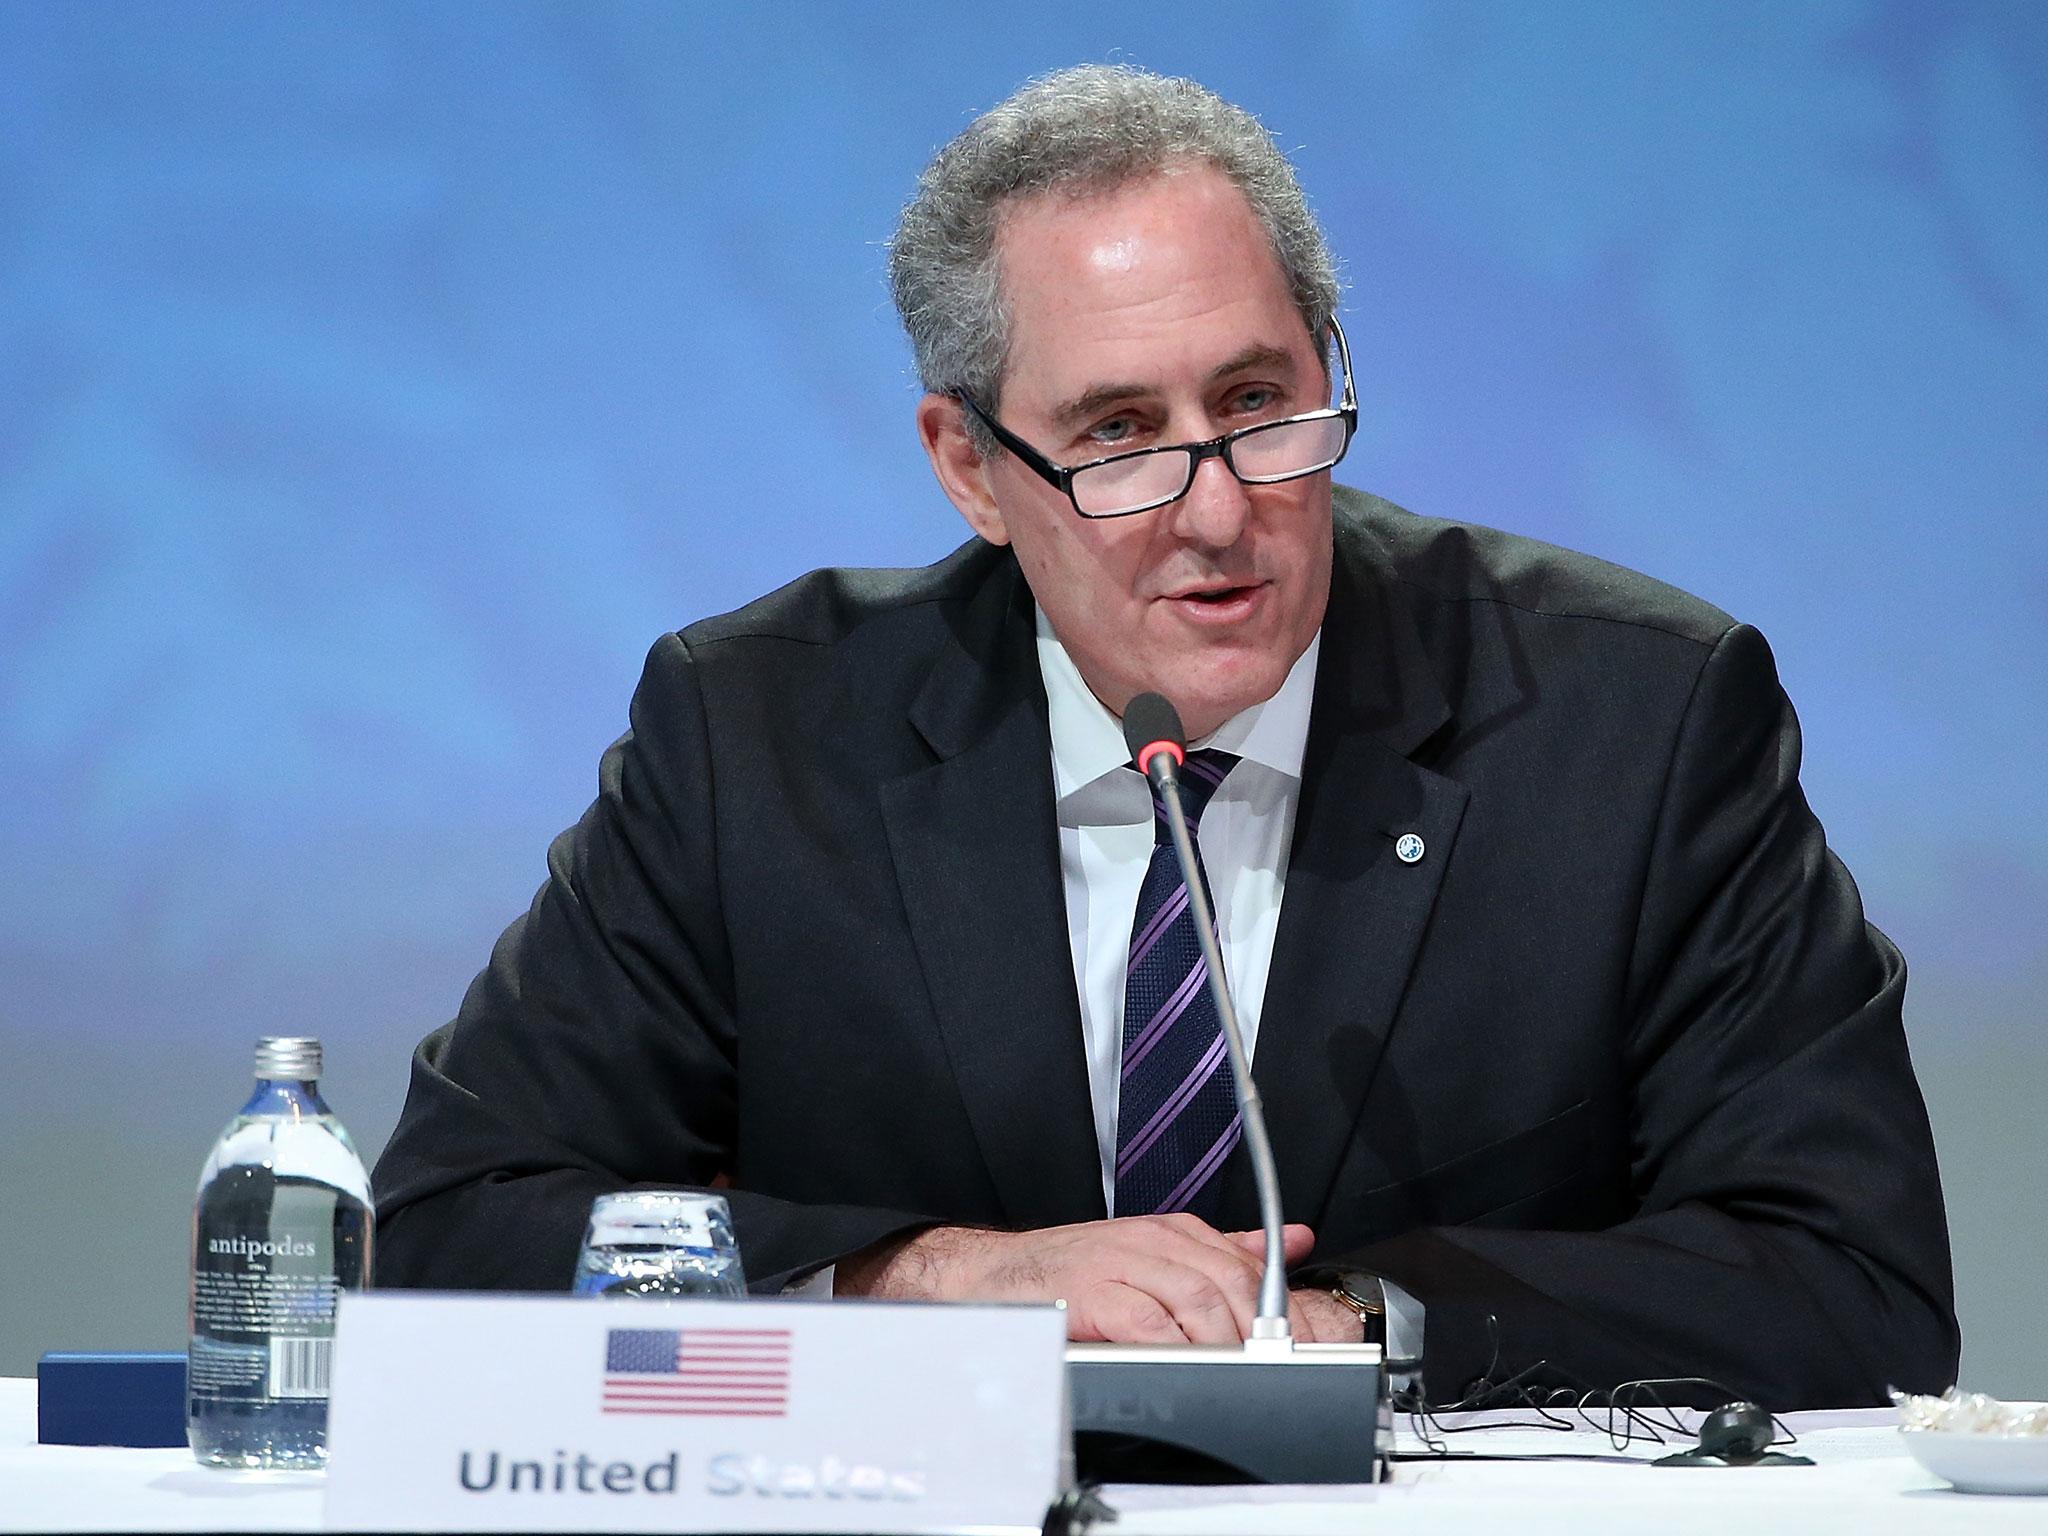 Michael Fromansaid that the US cannot start planning trade with the UK until decisions have been made about the future of its relationship with the EU